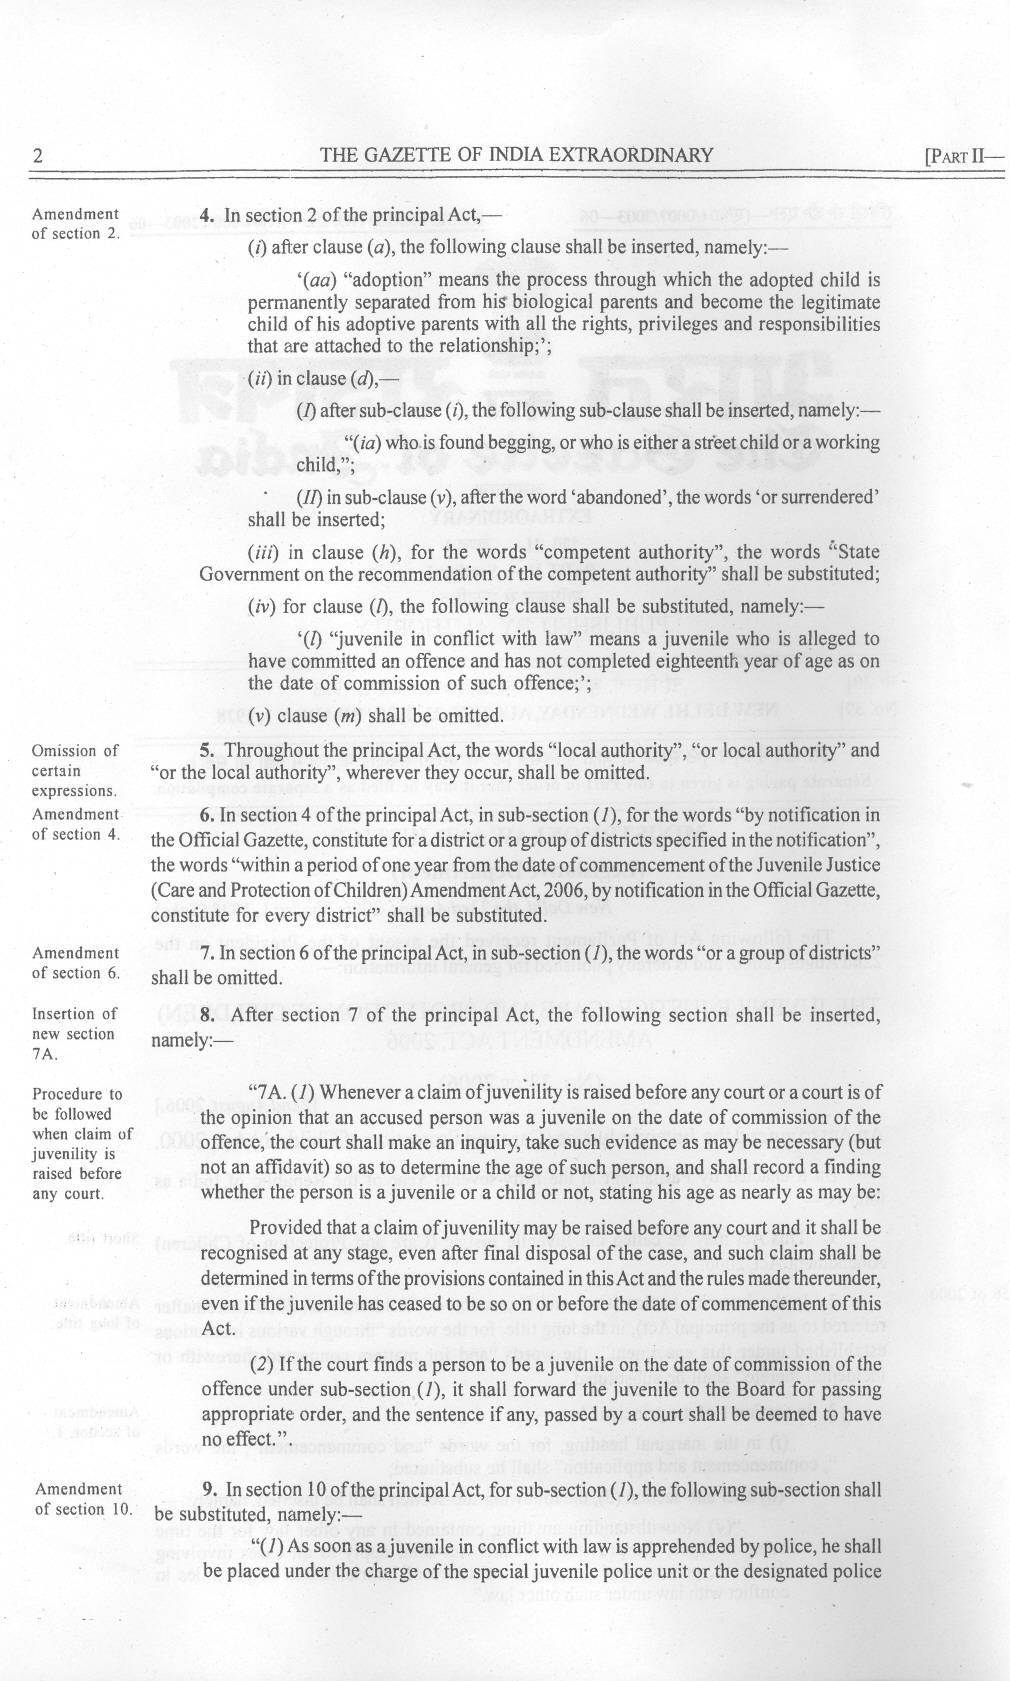 2 THE GAZETTEOF INDIAEXTRAORDINARY [PART11- of section 2. Omission of certain expressions.. of section 4. of section 6. Insertion of new section 7A.